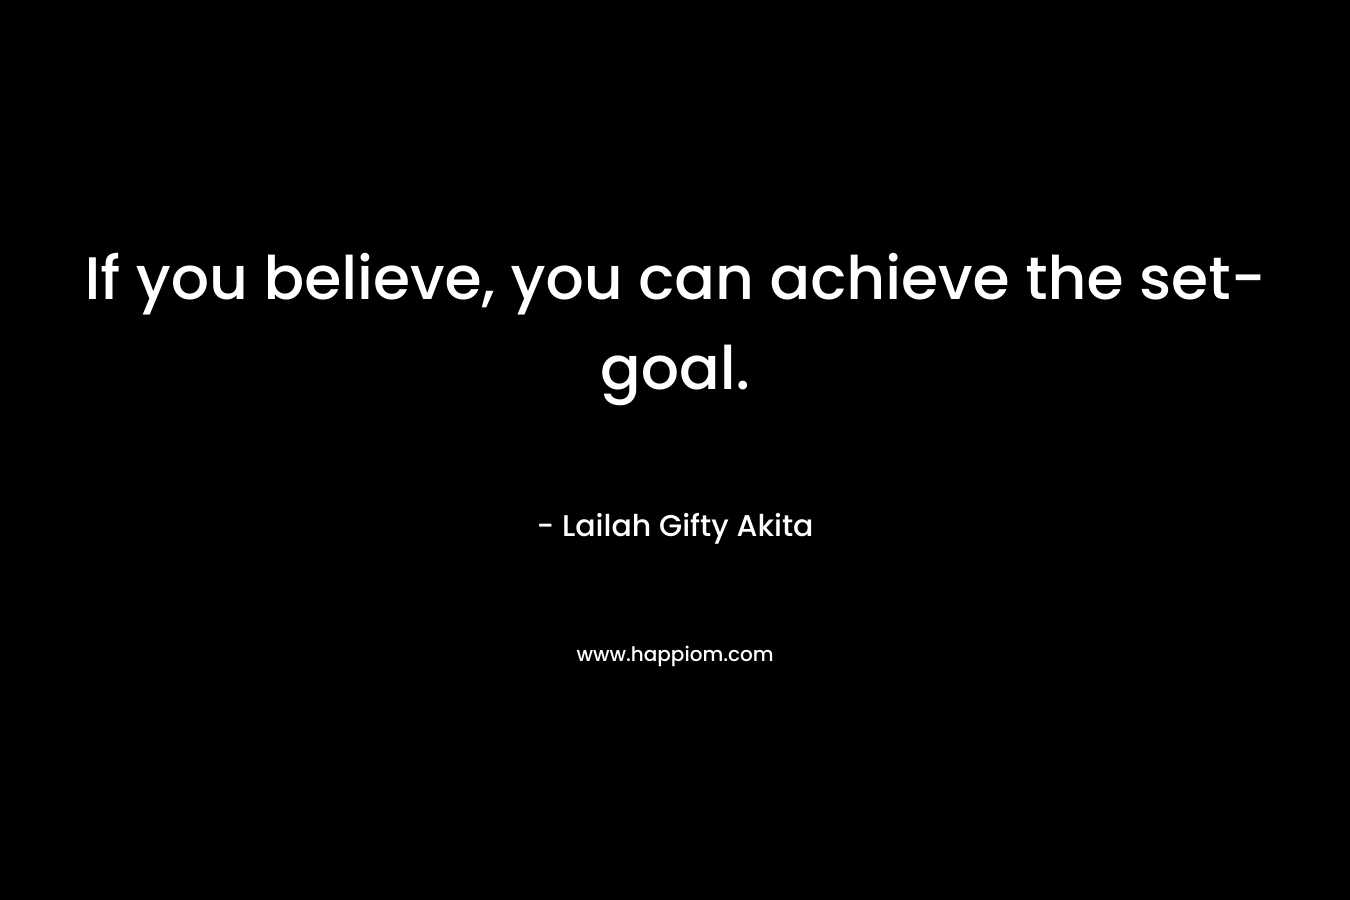 If you believe, you can achieve the set-goal.